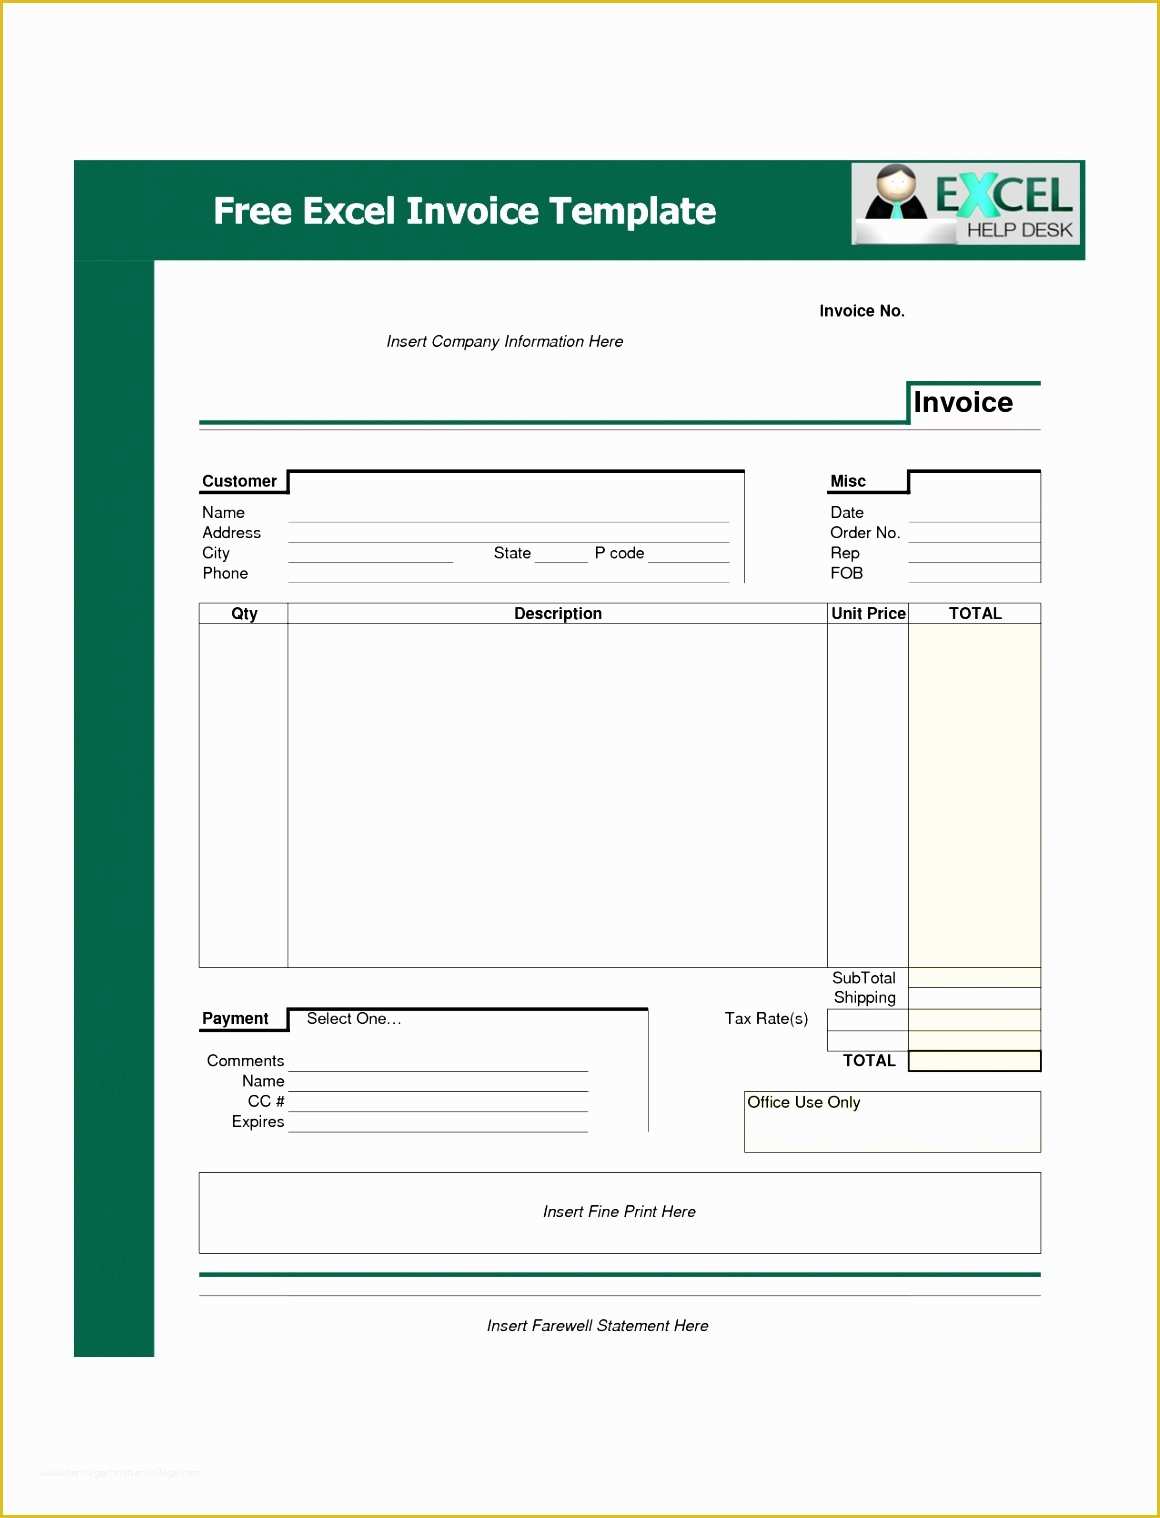 Free Excel Database Templates Of 10 Excel Database Templates Free Download Exceltemplates